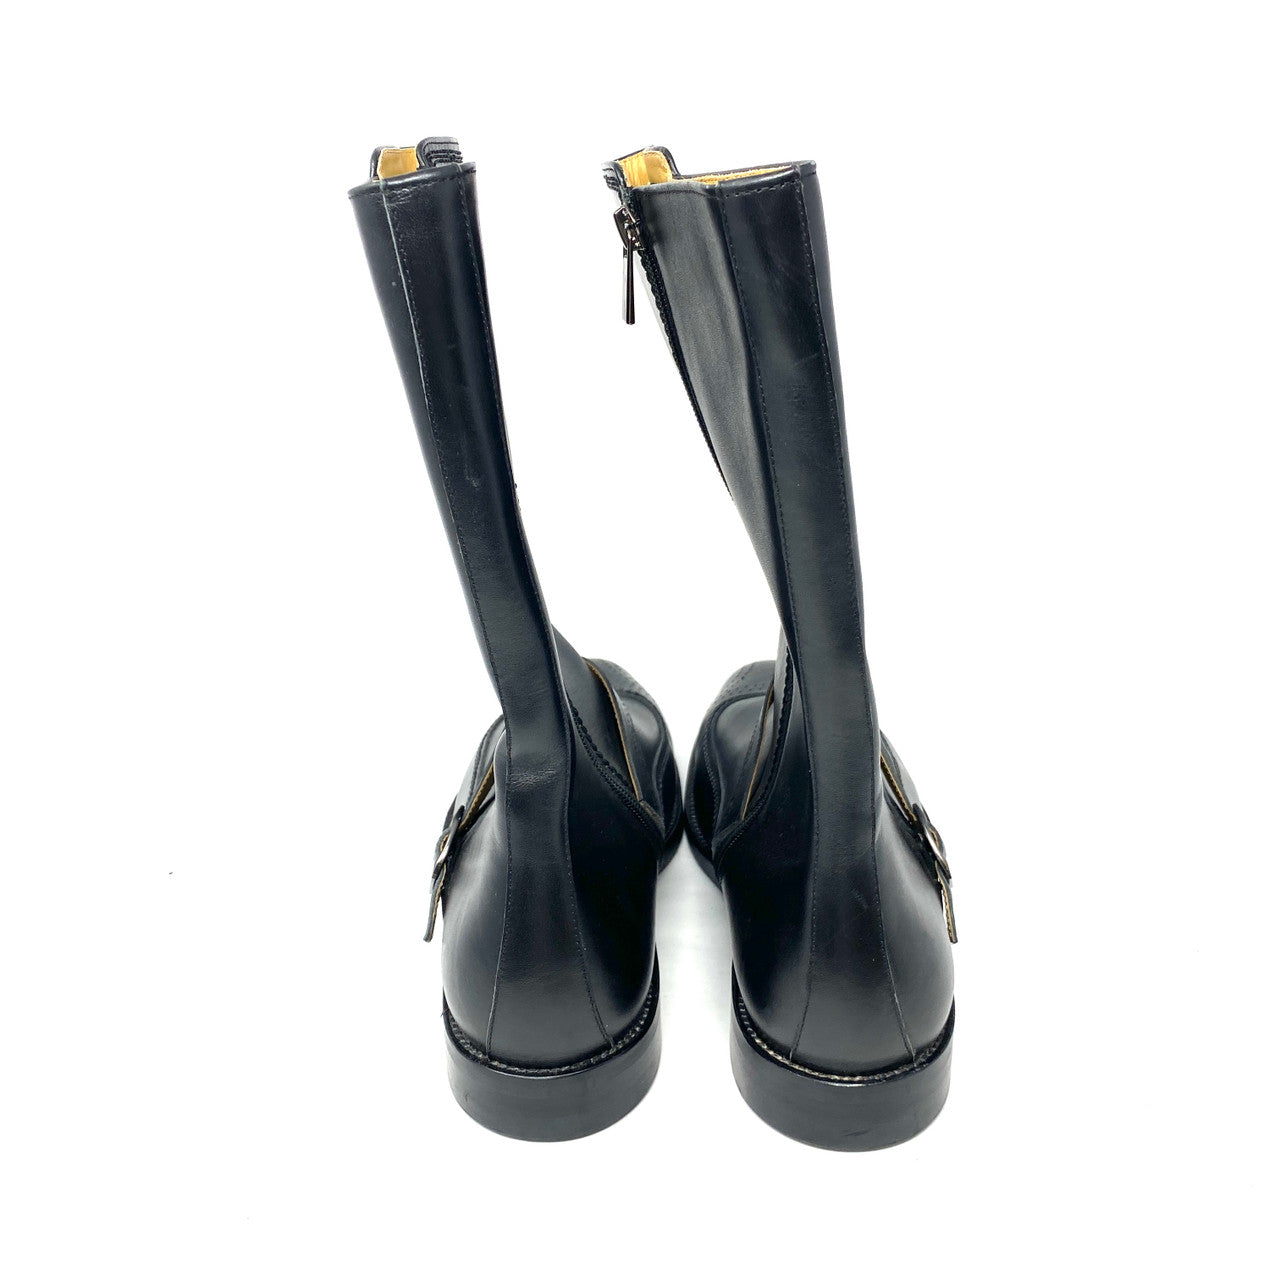 Awl and Sundry Black Tall Brogued Boots-Heel